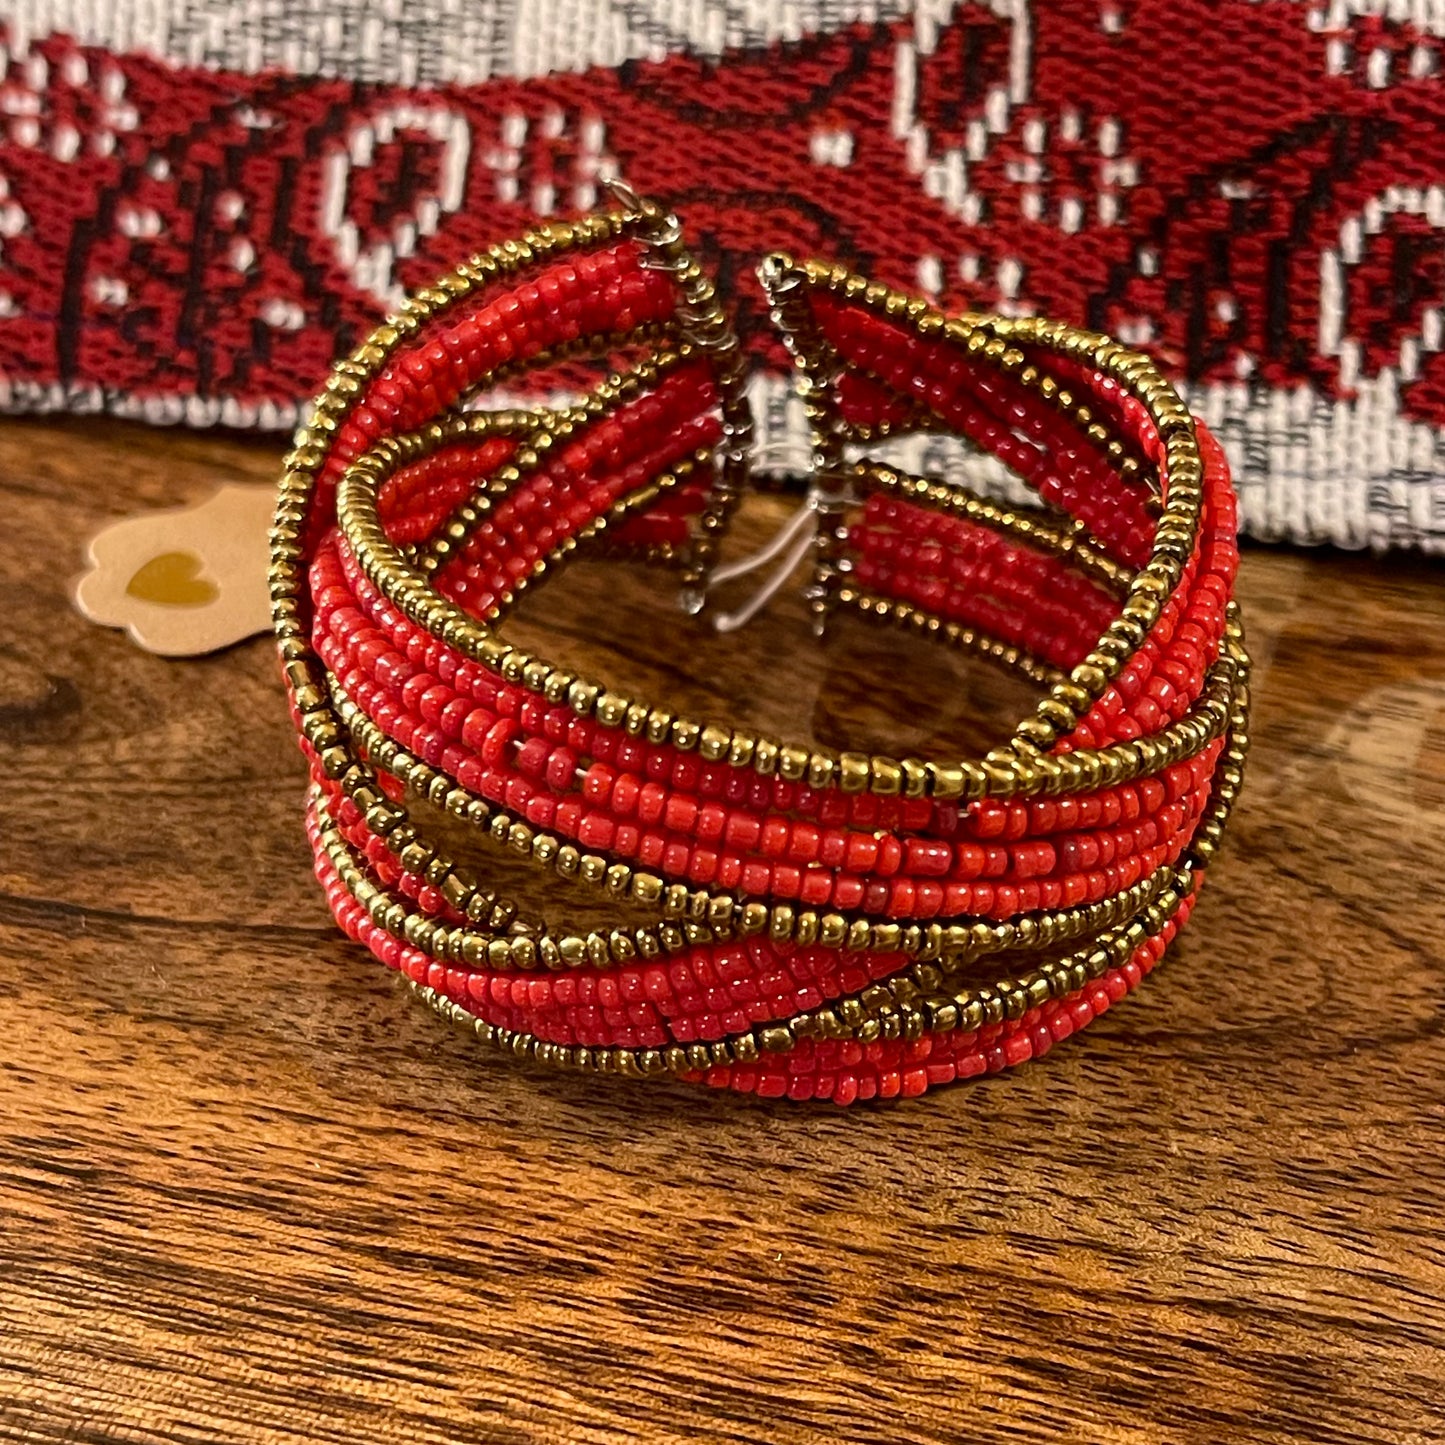 Seed Bead Red and Gold Cuff Bracelet